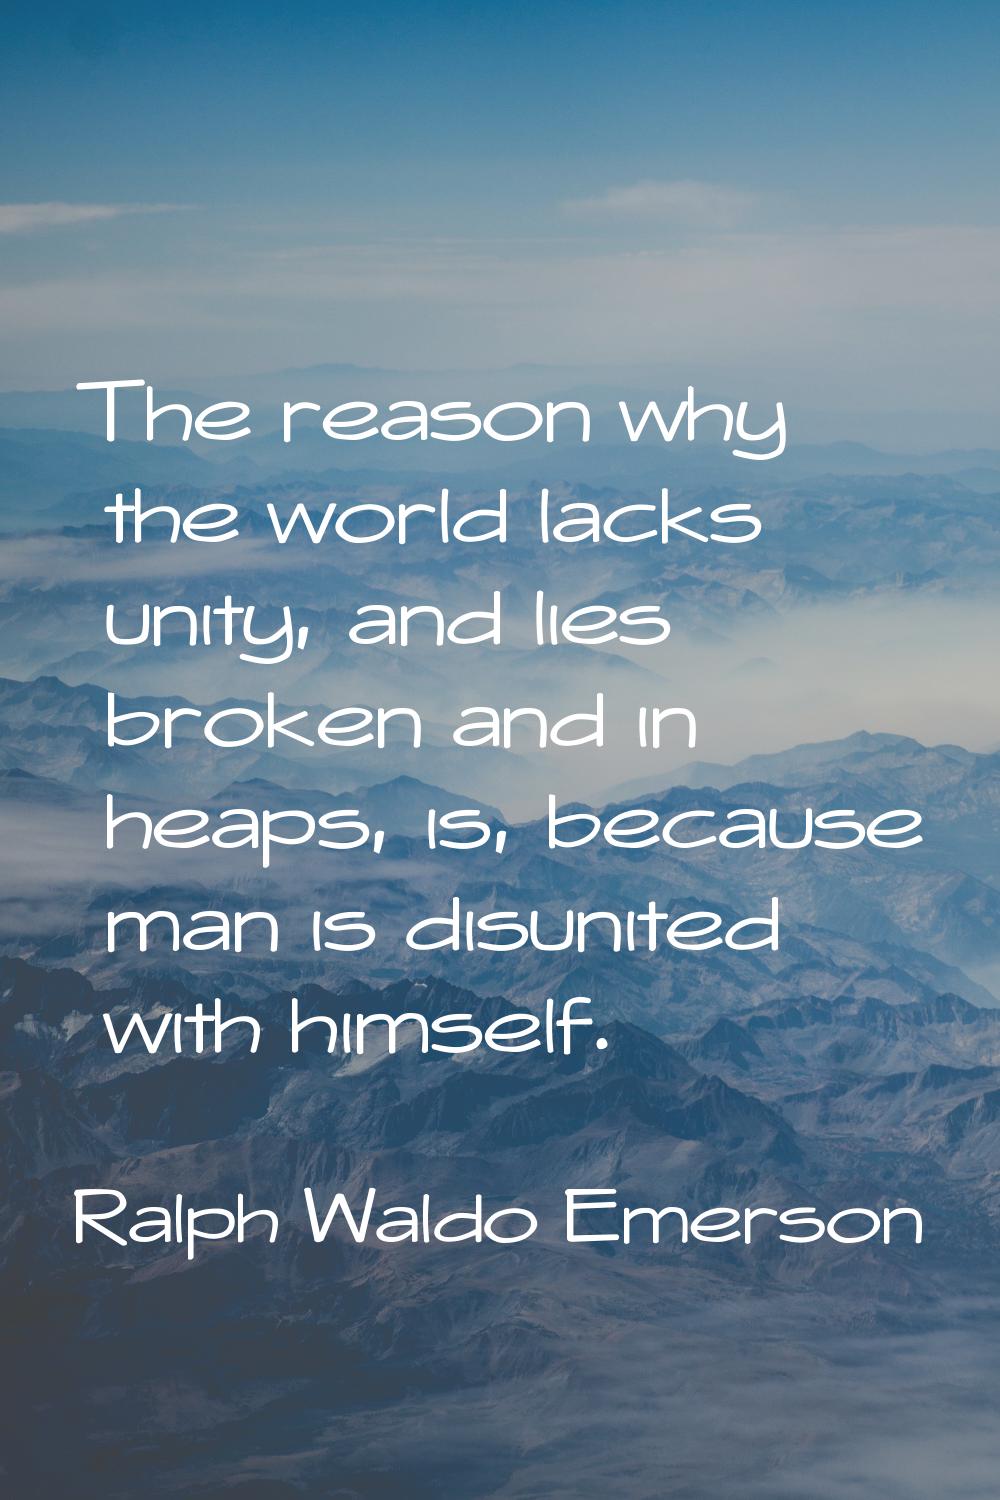 The reason why the world lacks unity, and lies broken and in heaps, is, because man is disunited wi